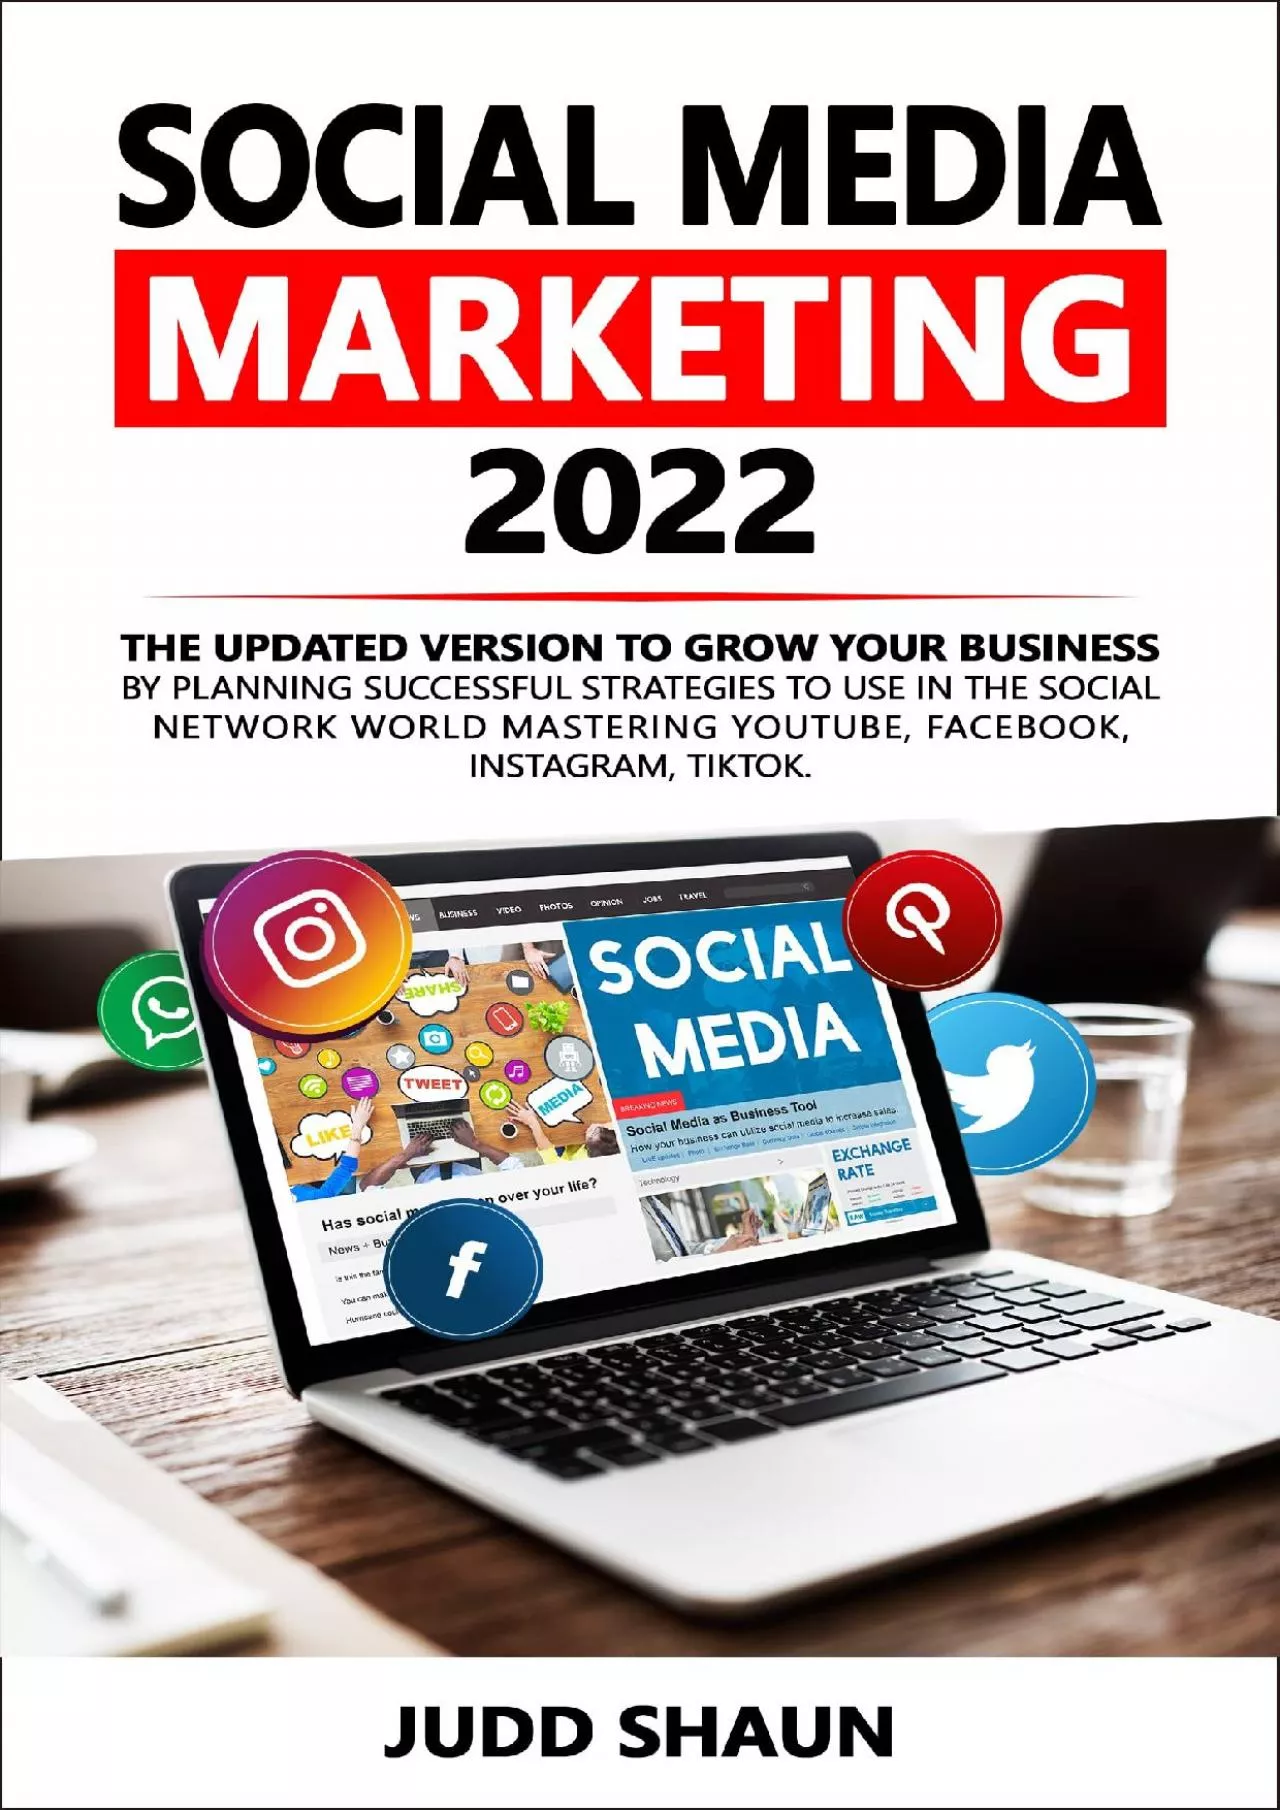 Social Media Marketing 2022: The updated version to grow your business by planning successful